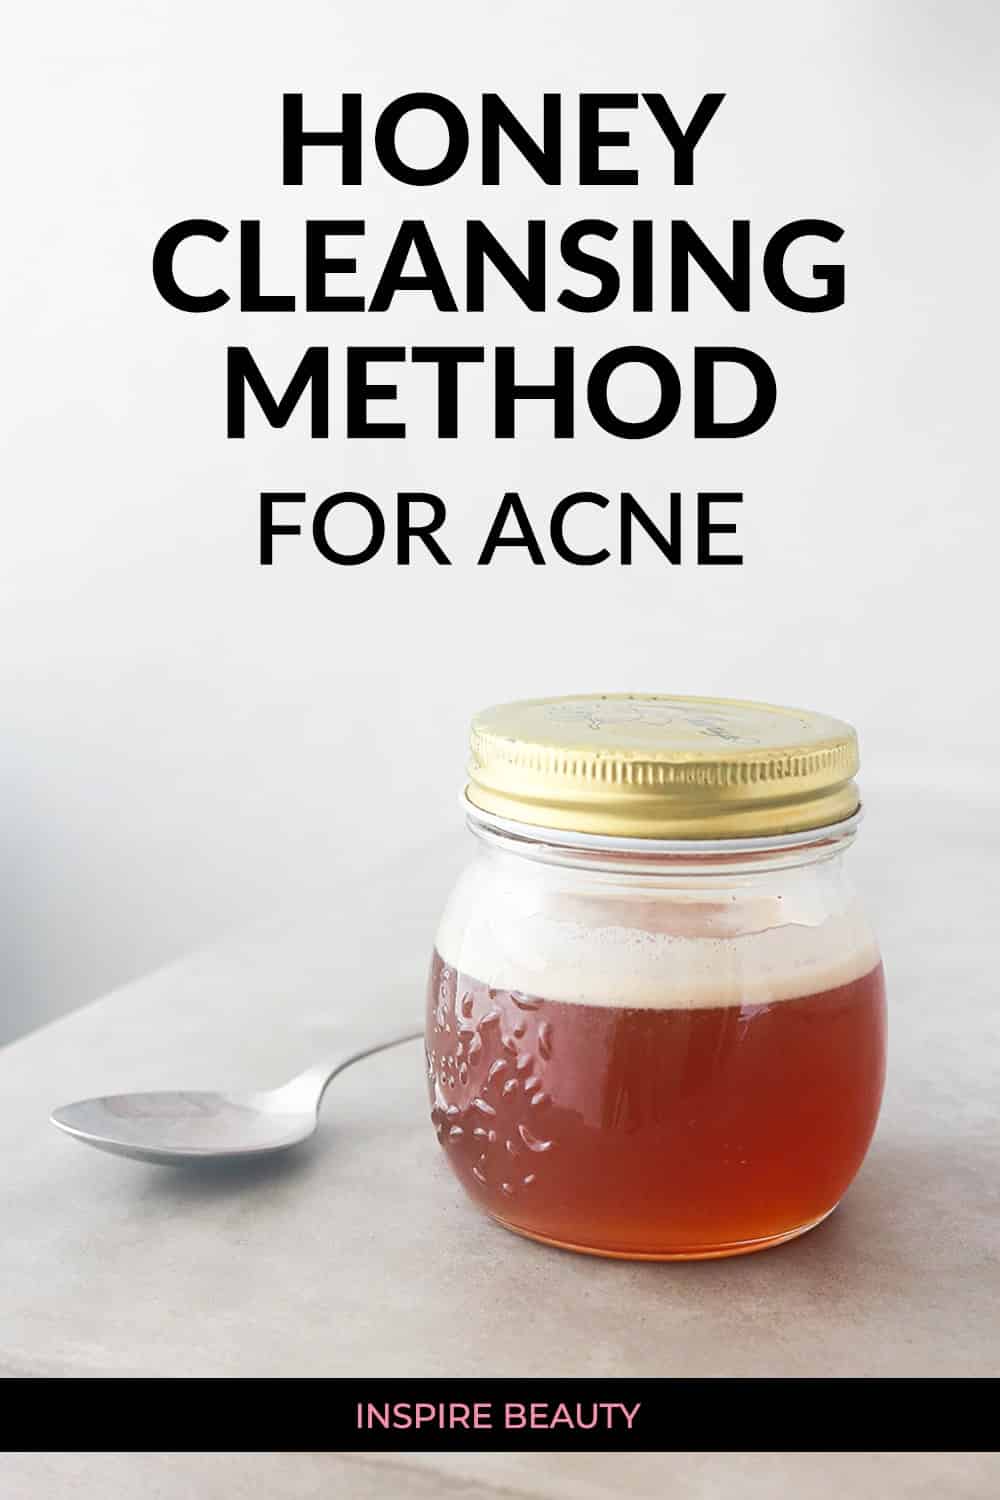 Honey cleanser for acne can help clear up breakouts and pimples fast, get instruction, video demo, and tips for best results